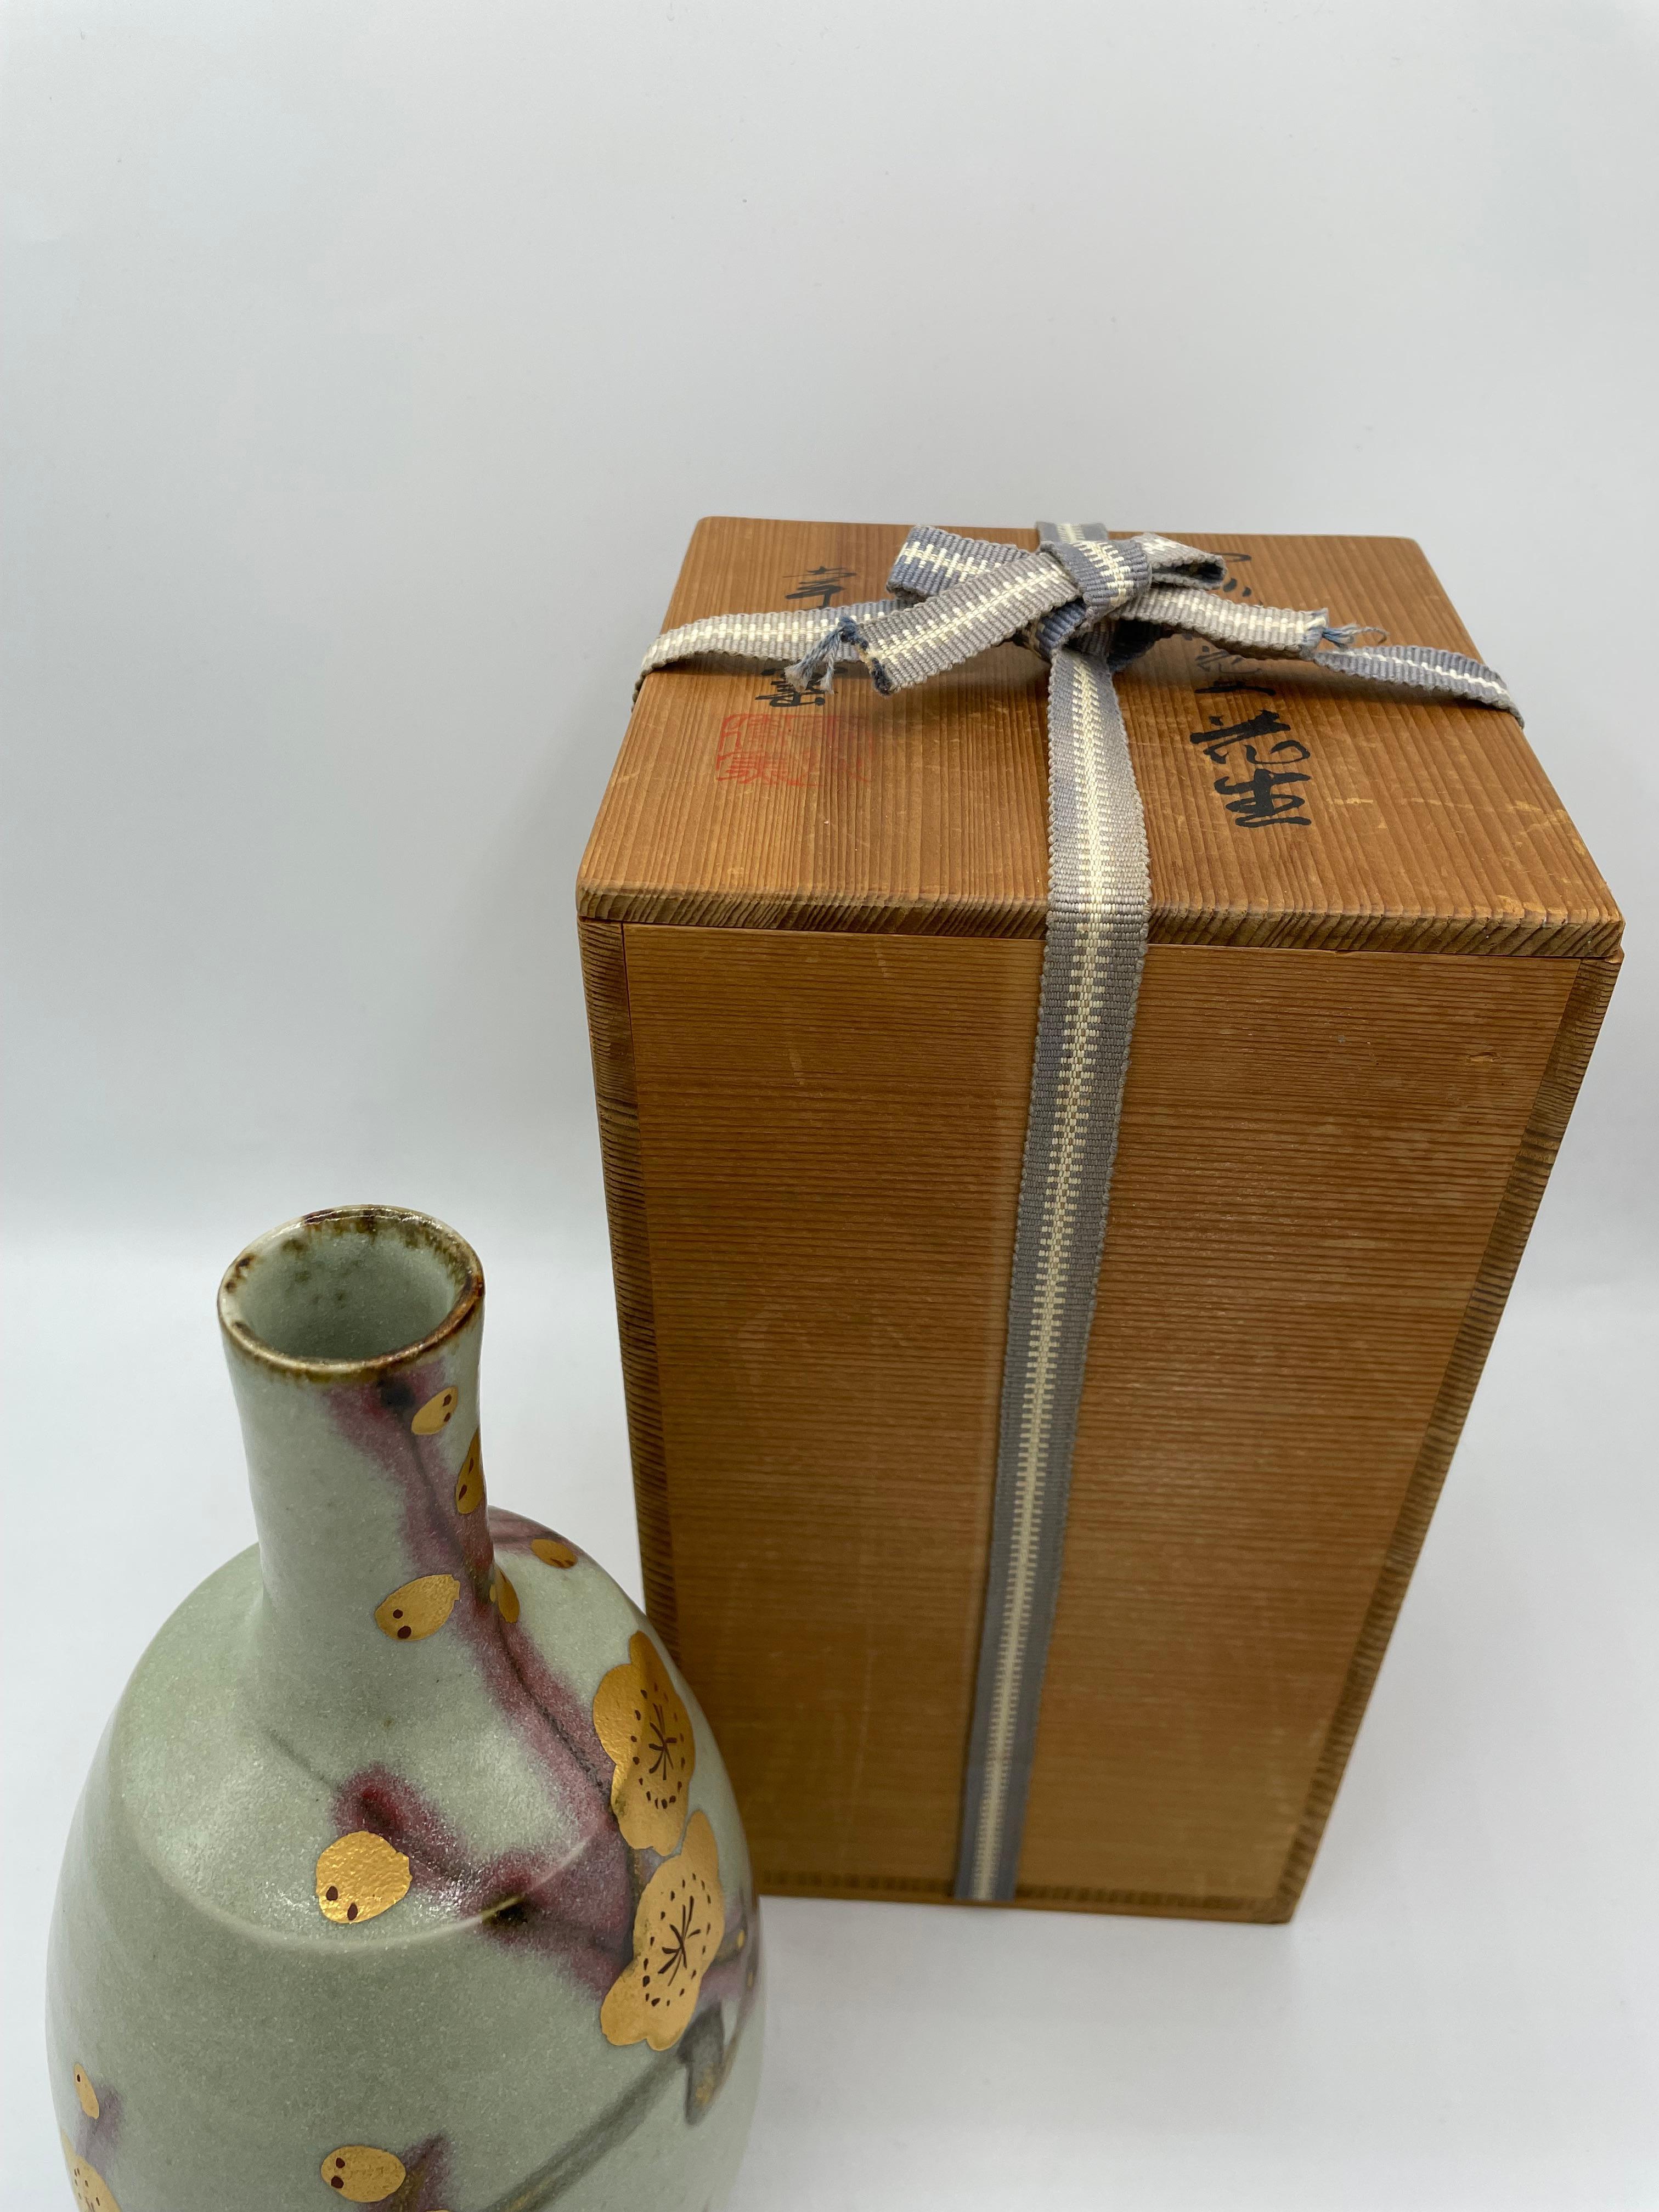 Japanese Flower Vase Plum 1970s  with Wooden Box For Sale 4